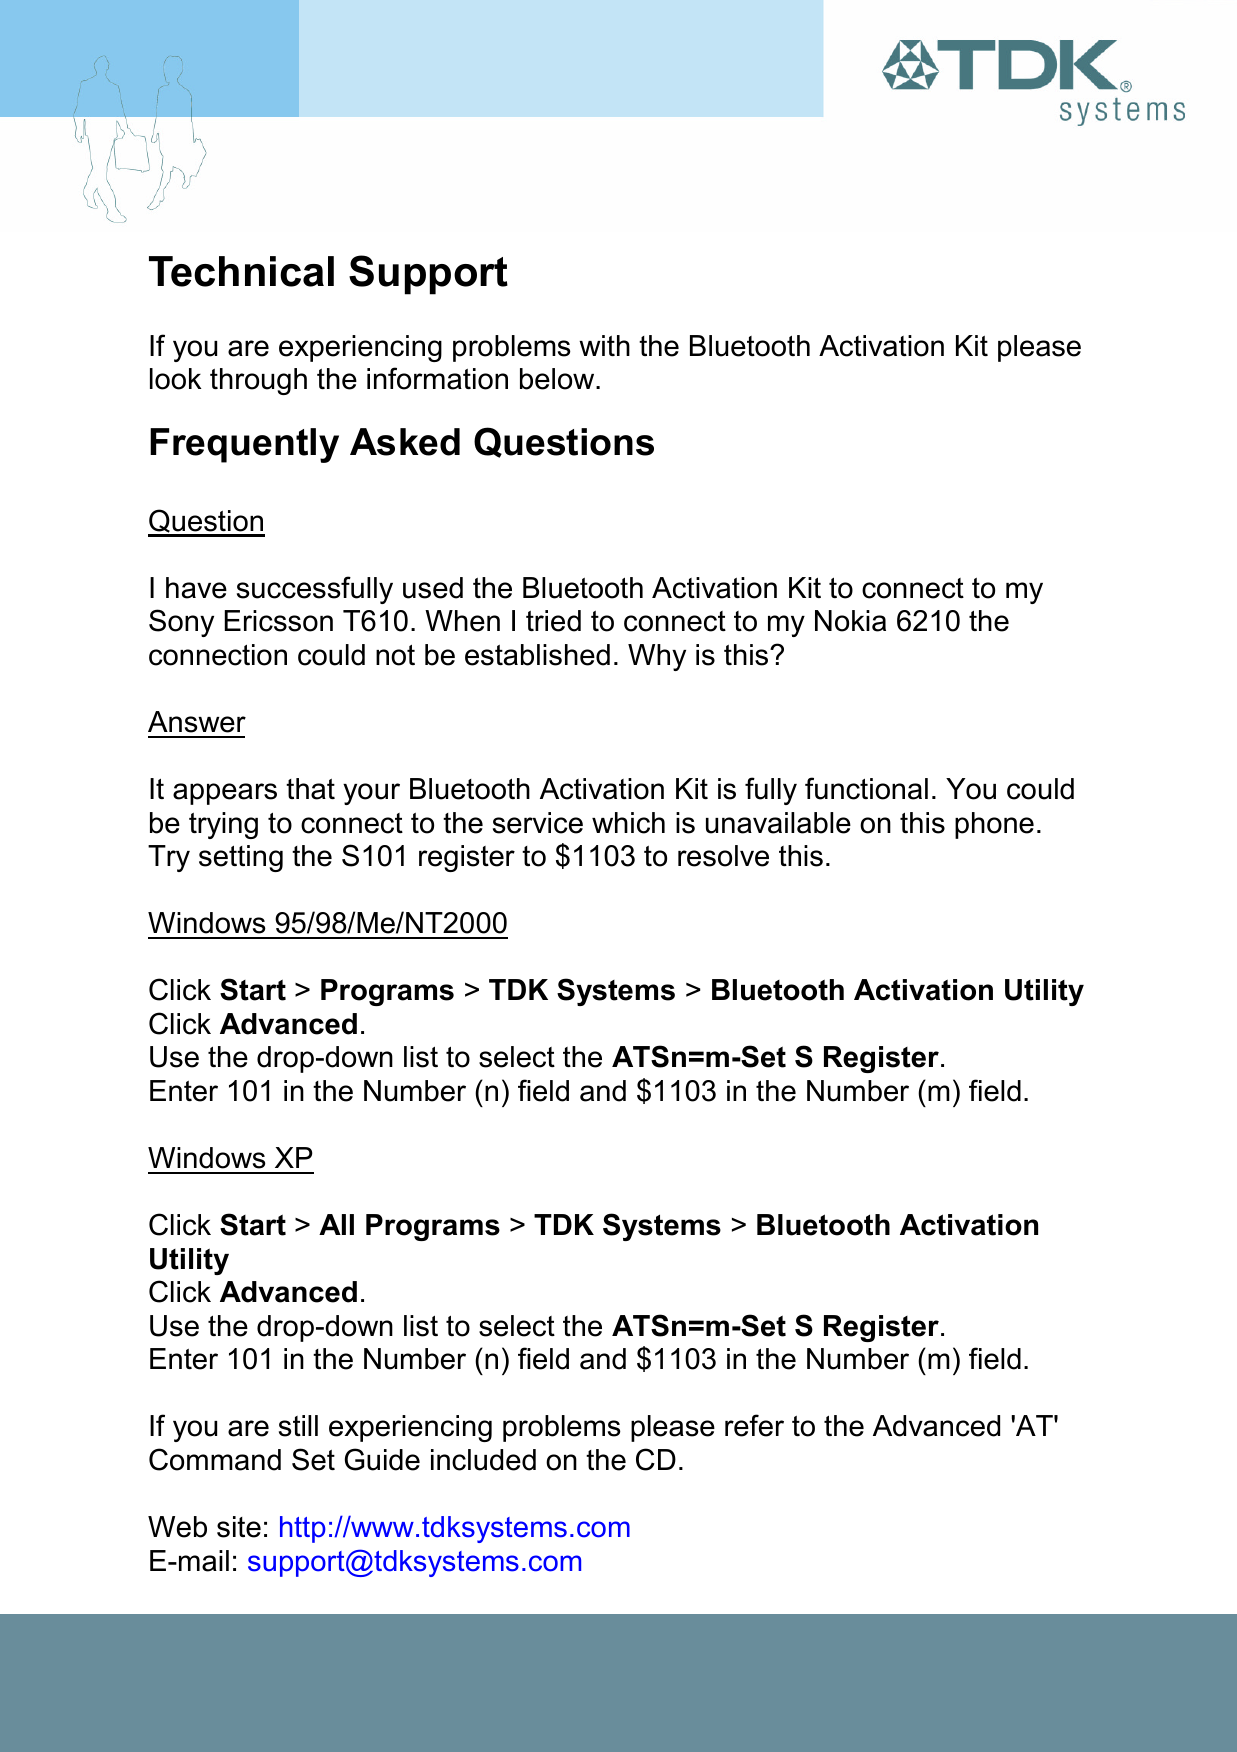 Technical Support  If you are experiencing problems with the Bluetooth Activation Kit please look through the information below. Frequently Asked Questions  Question   I have successfully used the Bluetooth Activation Kit to connect to my Sony Ericsson T610. When I tried to connect to my Nokia 6210 the connection could not be established. Why is this?  Answer  It appears that your Bluetooth Activation Kit is fully functional. You could be trying to connect to the service which is unavailable on this phone. Try setting the S101 register to $1103 to resolve this.  Windows 95/98/Me/NT2000  Click Start &gt; Programs &gt; TDK Systems &gt; Bluetooth Activation Utility Click Advanced. Use the drop-down list to select the ATSn=m-Set S Register. Enter 101 in the Number (n) field and $1103 in the Number (m) field.  Windows XP  Click Start &gt; All Programs &gt; TDK Systems &gt; Bluetooth Activation Utility Click Advanced. Use the drop-down list to select the ATSn=m-Set S Register. Enter 101 in the Number (n) field and $1103 in the Number (m) field.  If you are still experiencing problems please refer to the Advanced &apos;AT&apos; Command Set Guide included on the CD.   Web site: http://www.tdksystems.com E-mail: support@tdksystems.com  